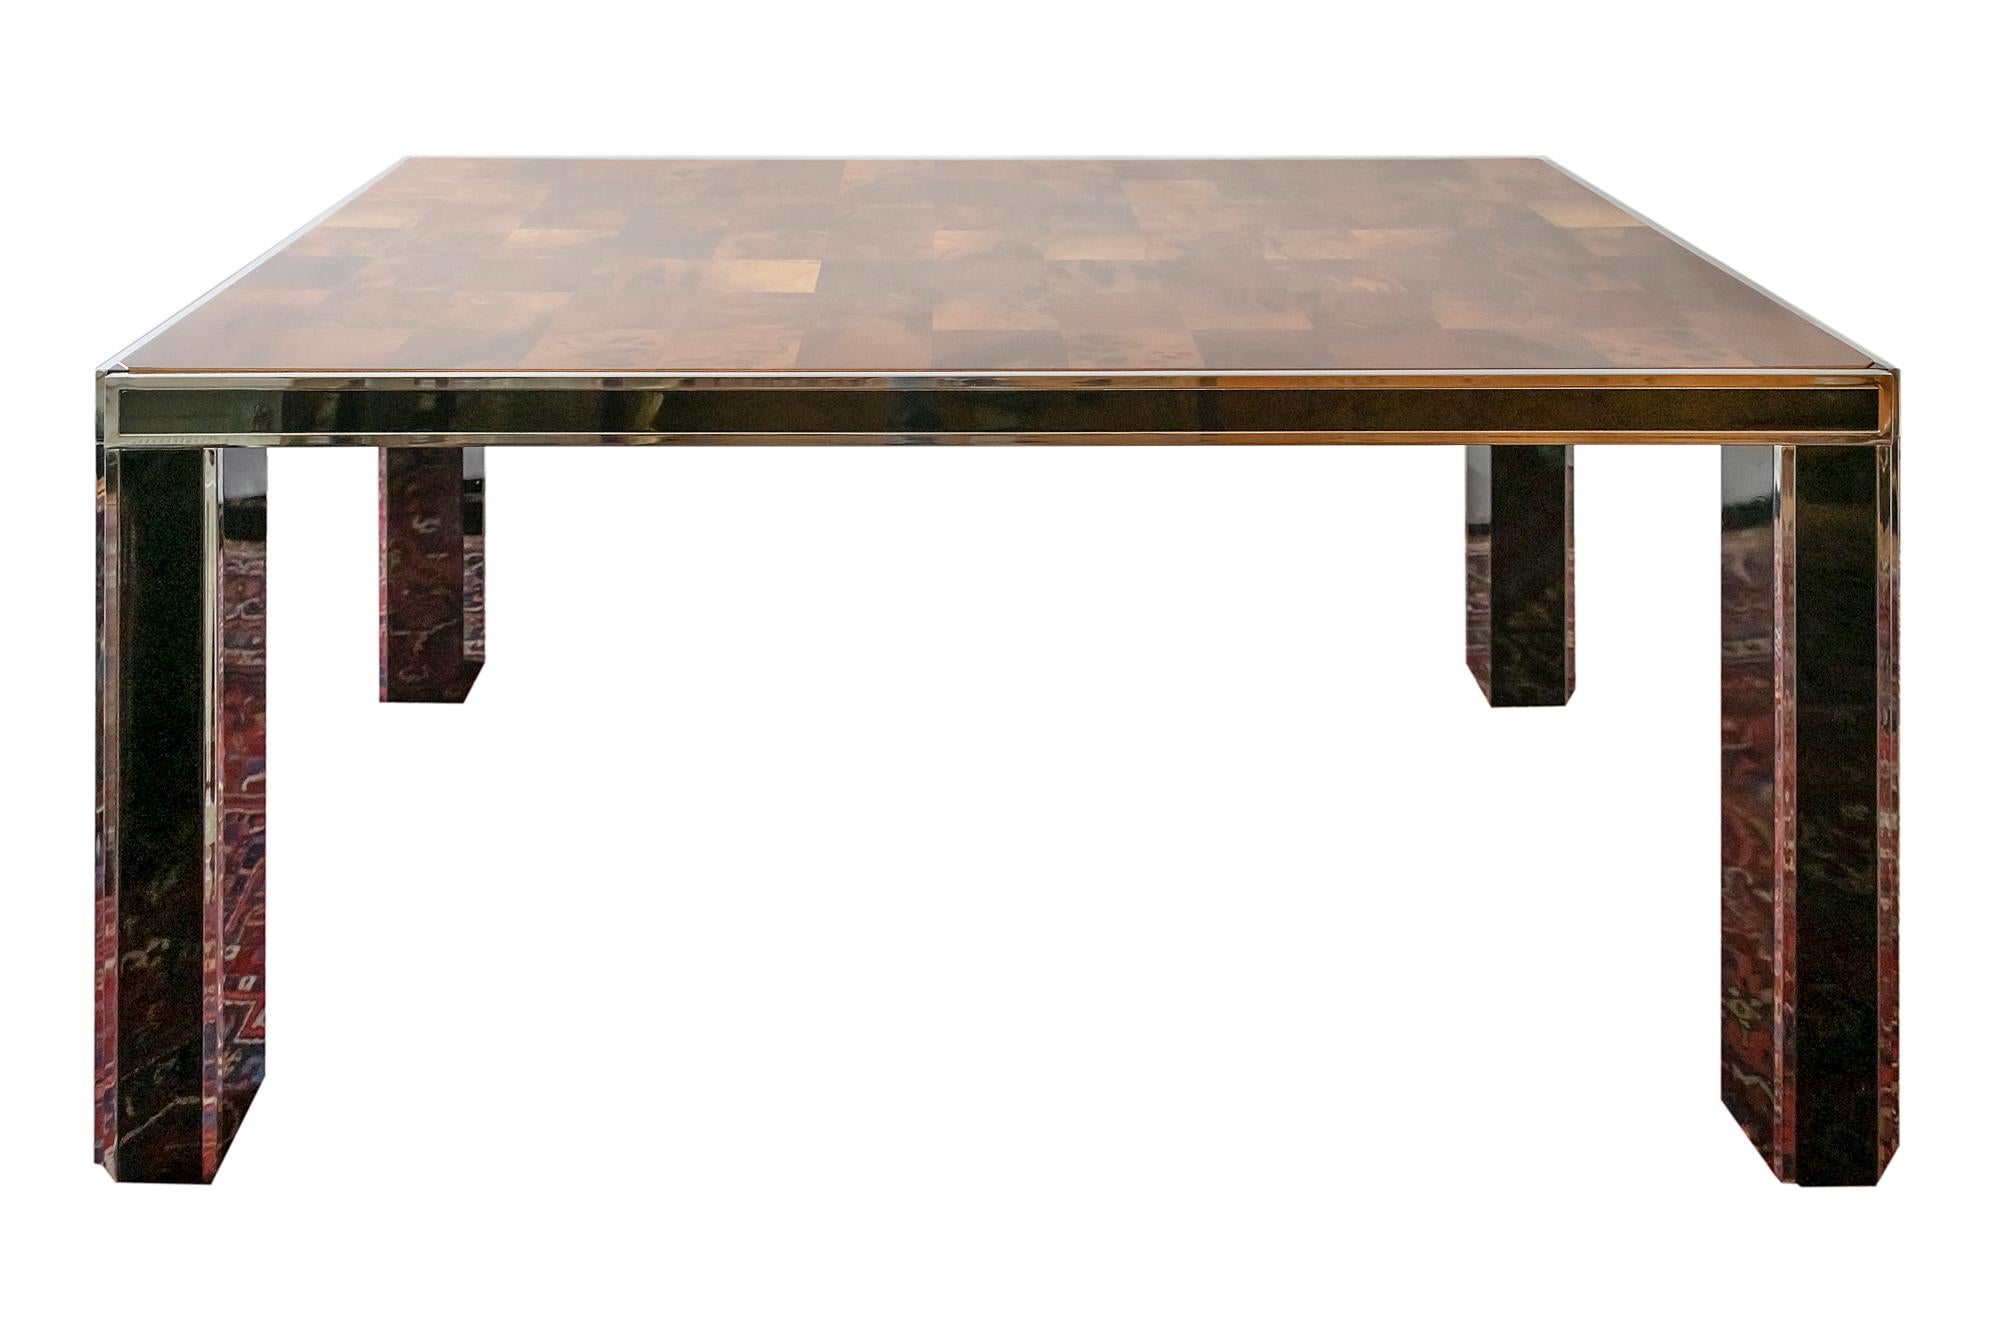 Midcentury Italian dining table by Willy Rizzo.
It is finished with black glossy stained verneer surface legs decorated with chrome details.
The top is in burl verneer with lacquer finish.
Very good vintage condition.
 